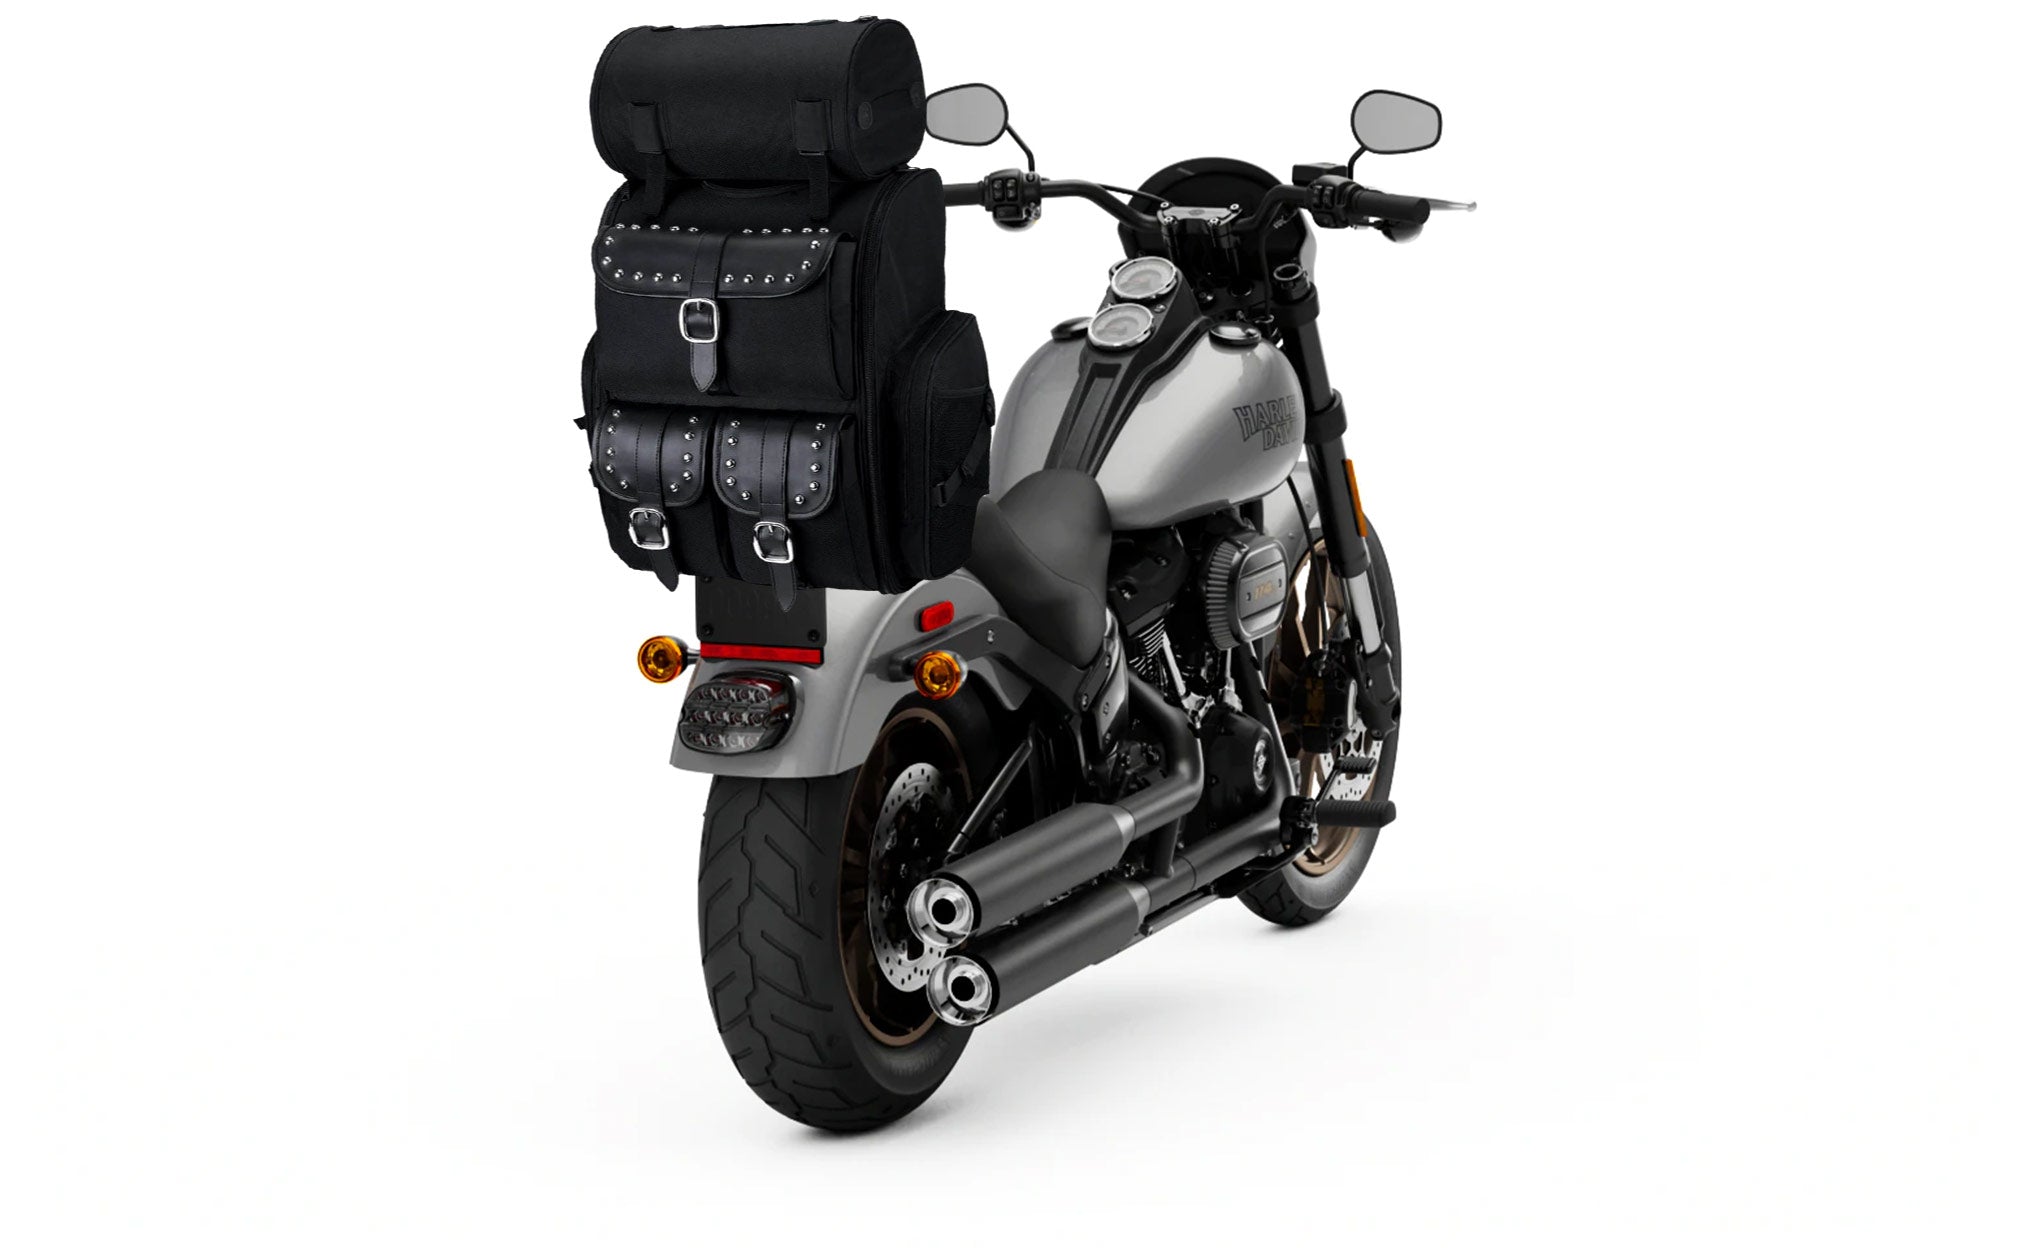 Viking Highway Extra Large Studded Motorcycle Tail Bag for Harley Davidson Bag on Bike View @expand